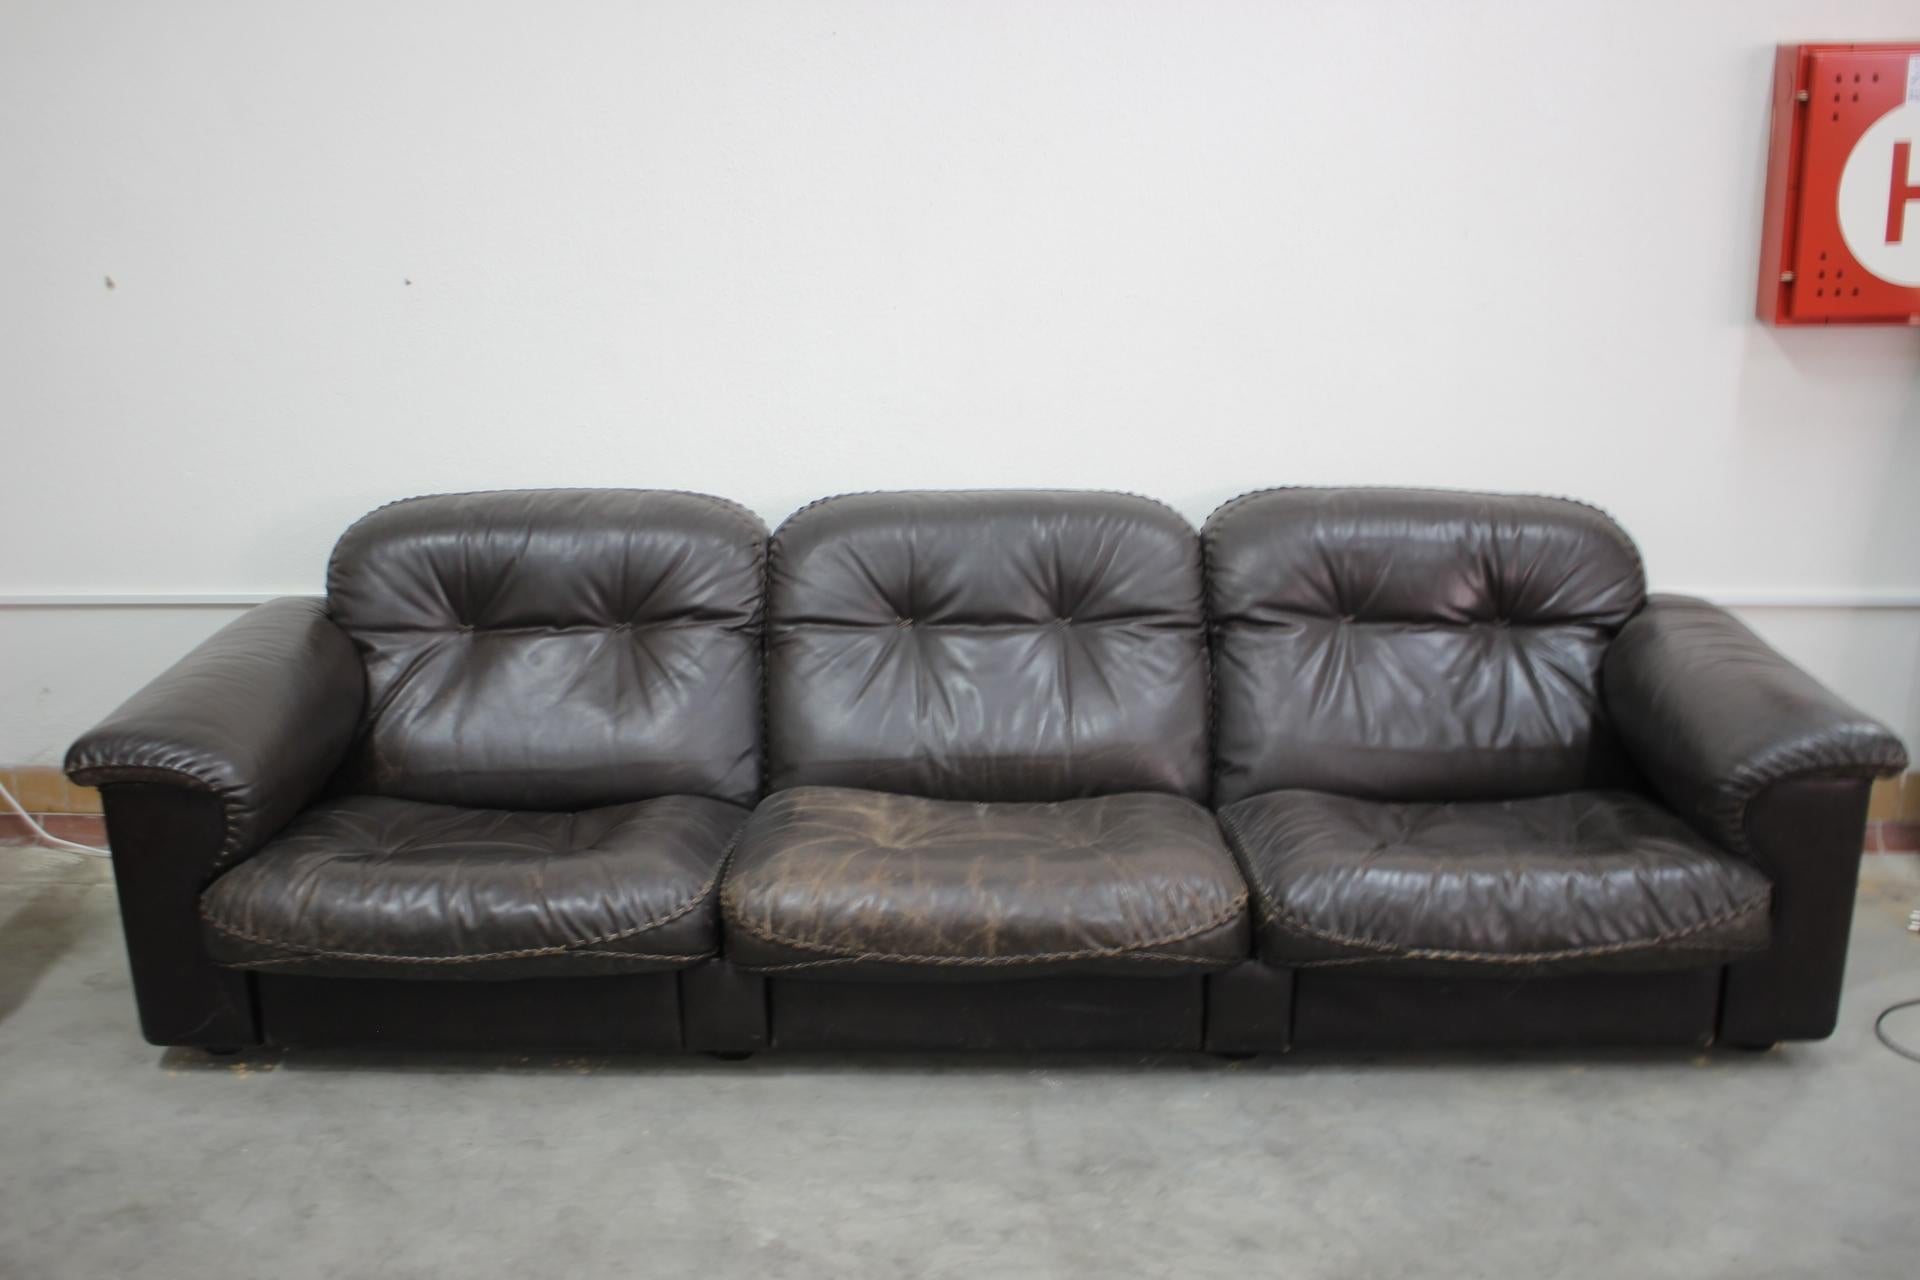 - good condition with some signs of use 
- height of seat 35 cm 
- adjustable depth from 82 - 104 cm